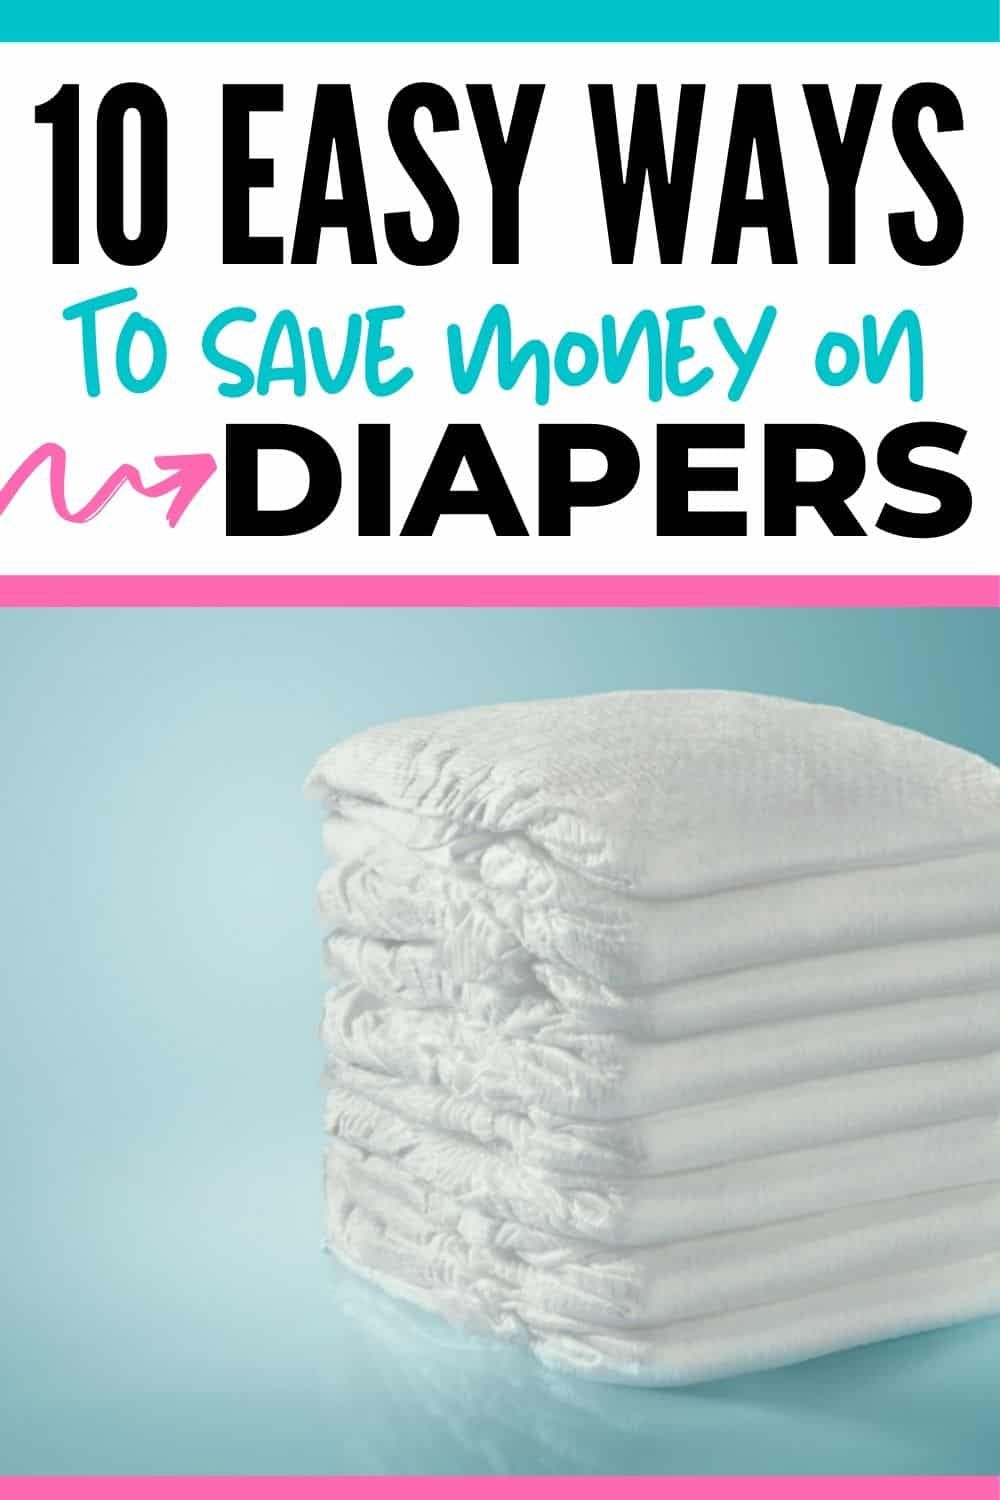 How much do diapers cost? Plus 10 ways to save on diapers